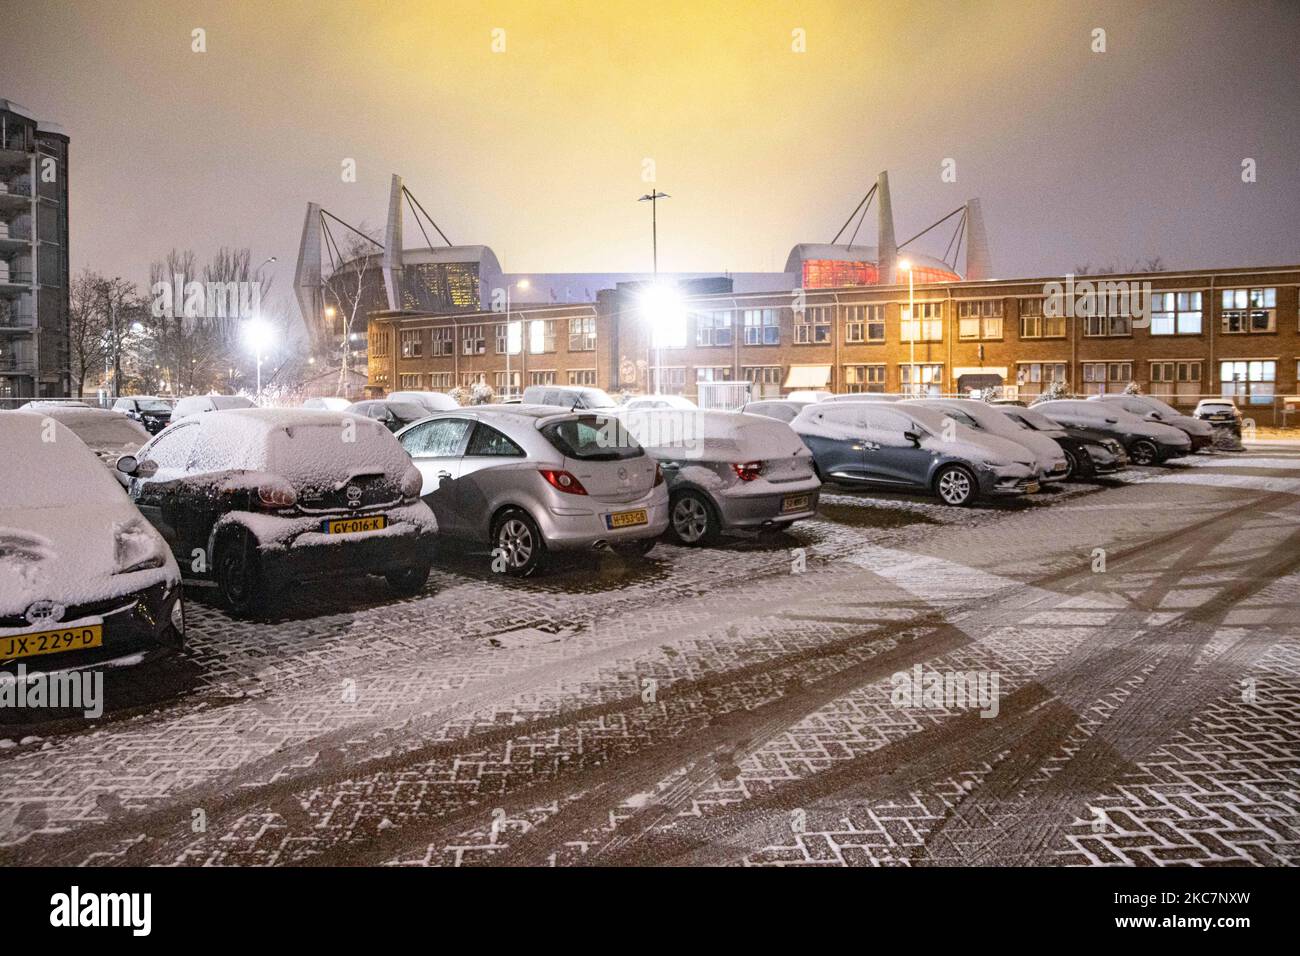 Snow covered vehicles in front of PSV Philips Stadion Stadium in Eindhoven during the night. Night long exposure photography images of snow-covered and illuminated with city lights Eindhoven city center after the snowfall. Daily life in the Netherlands with the first snowfall of the year covering almost everything the cold weather shows subzero temperature. The chilly condition with snow and ice changed soon according to the forecast, the freezing condition will not last more than a day. Eindhoven, the Netherlands on January 16, 2020 (Photo by Nicolas Economou/NurPhoto) Stock Photo